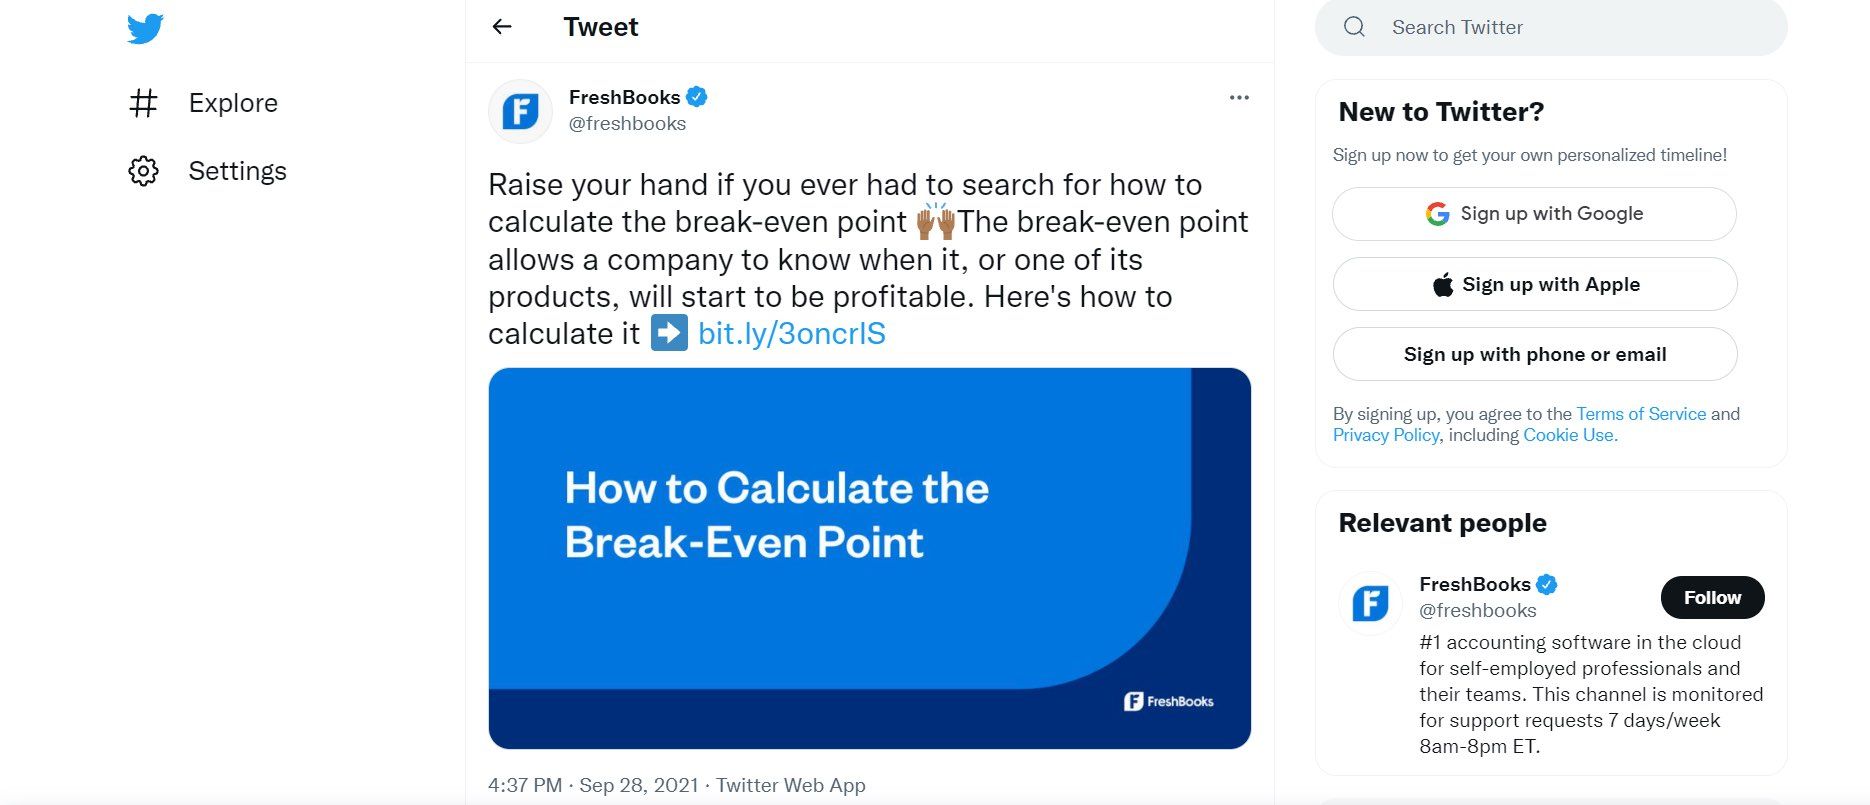 Tweet by @FreshBooks shares expert content